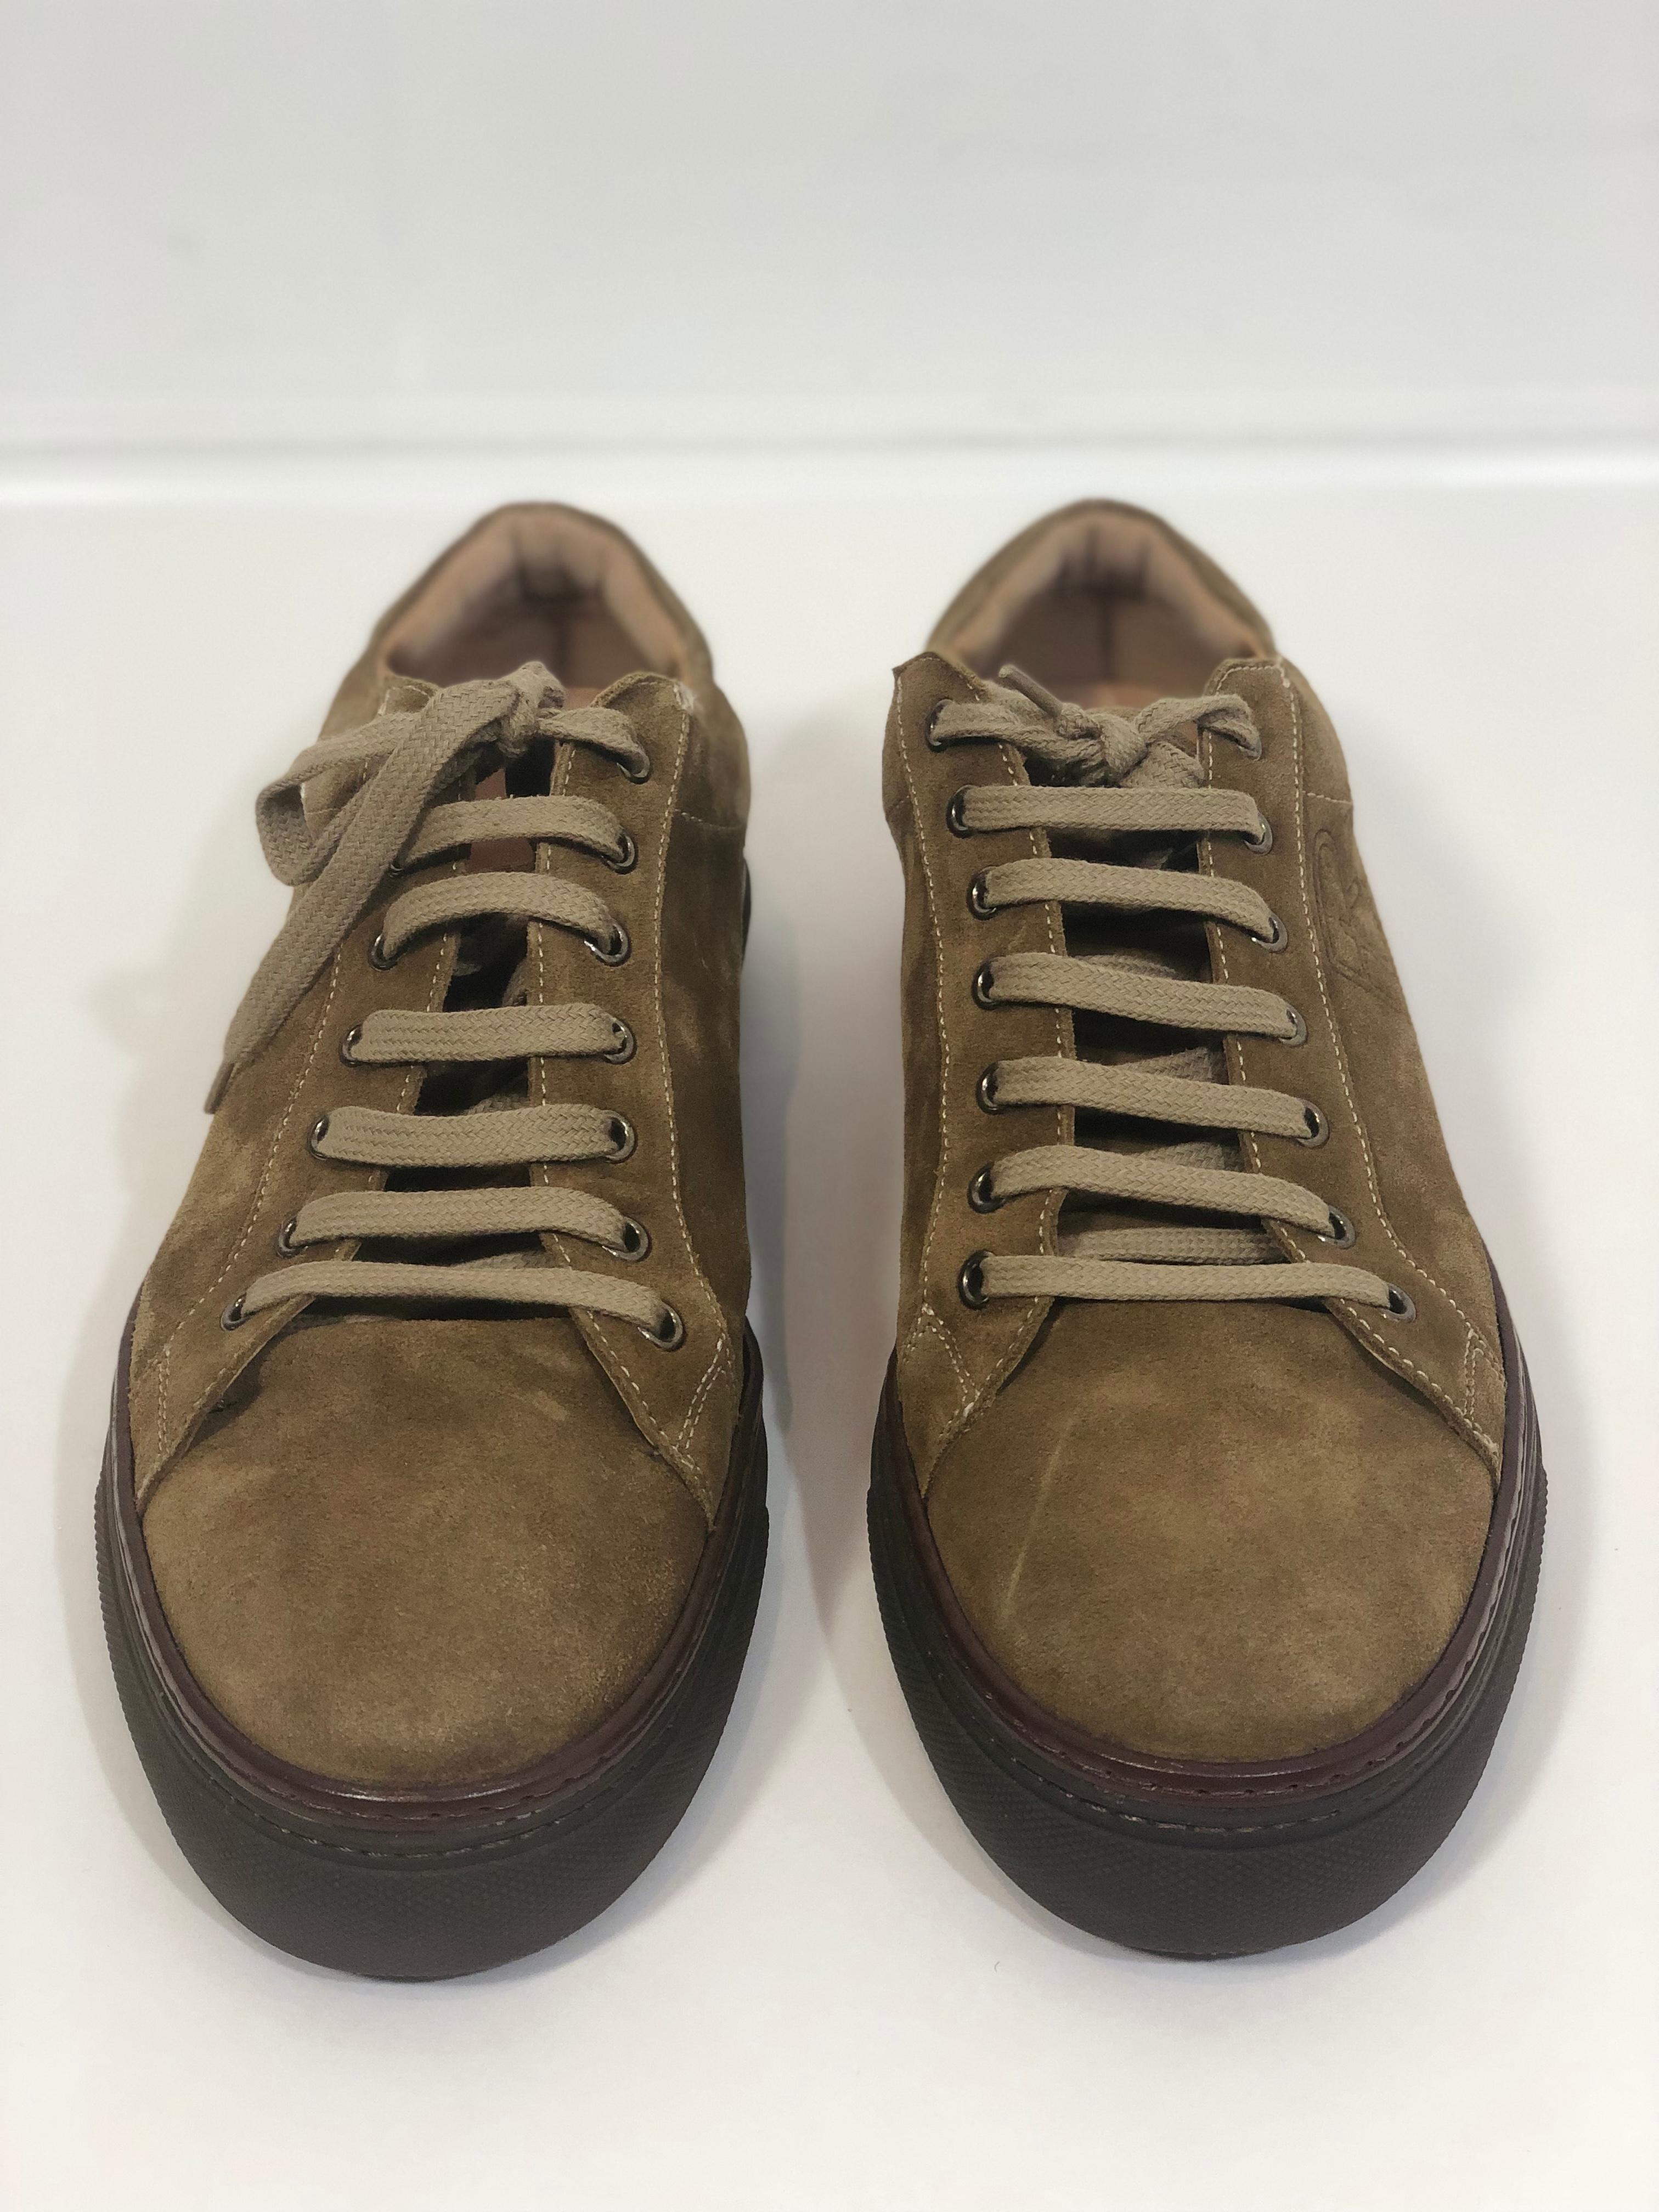 Men's Ralph Lauren Brown Suede Sneakers w/ Tan Leather Lining and Khaki Lining. 